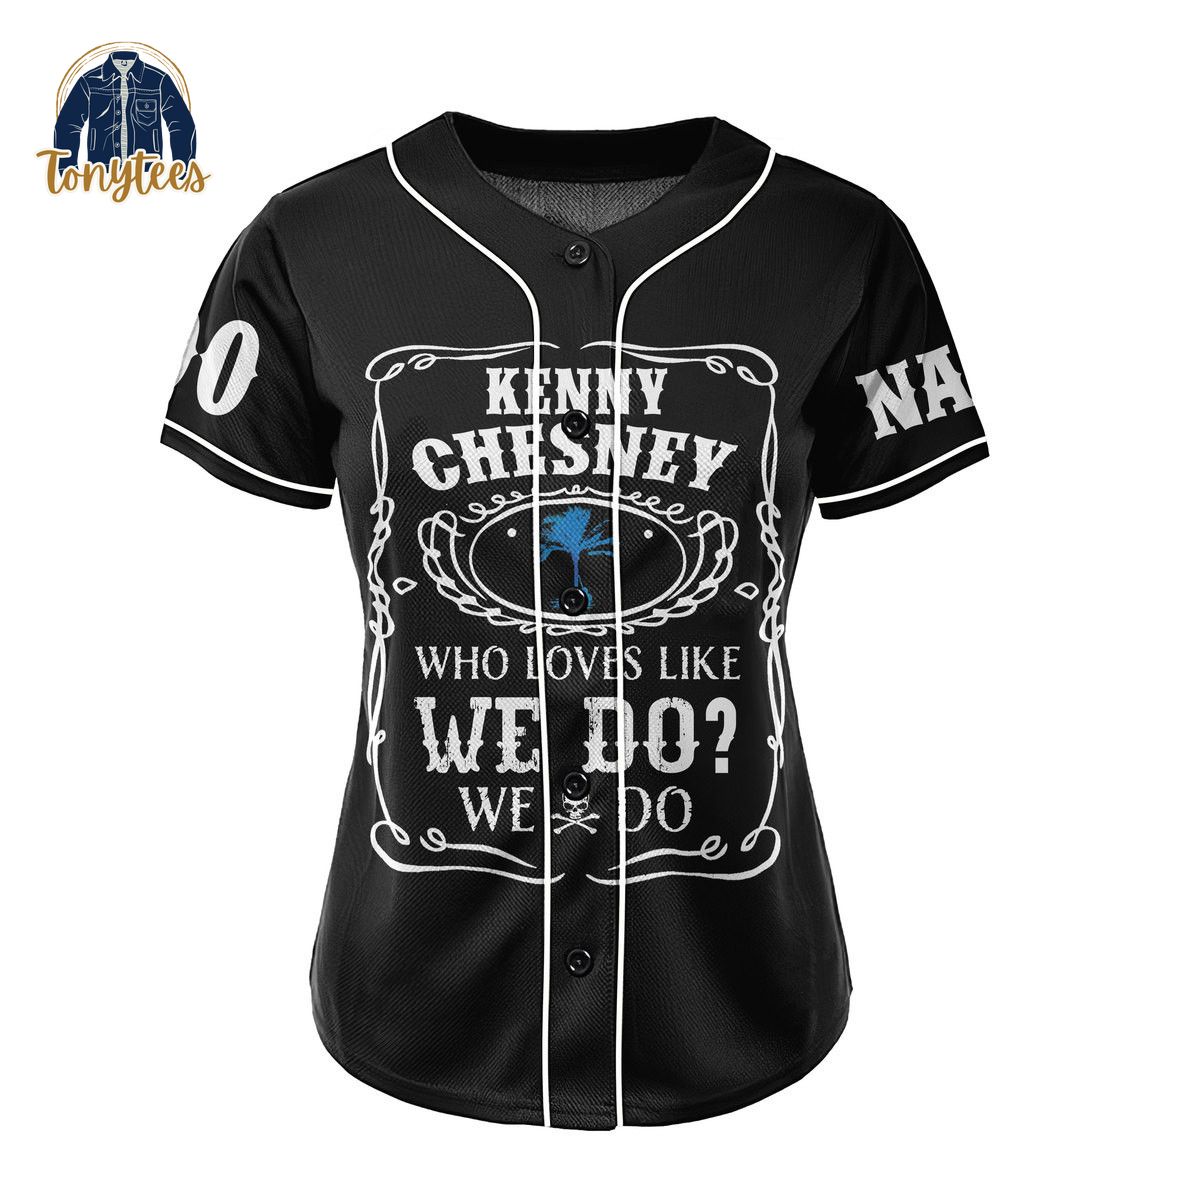 Kenny Chesney who loves like we do personalized baseball jersey